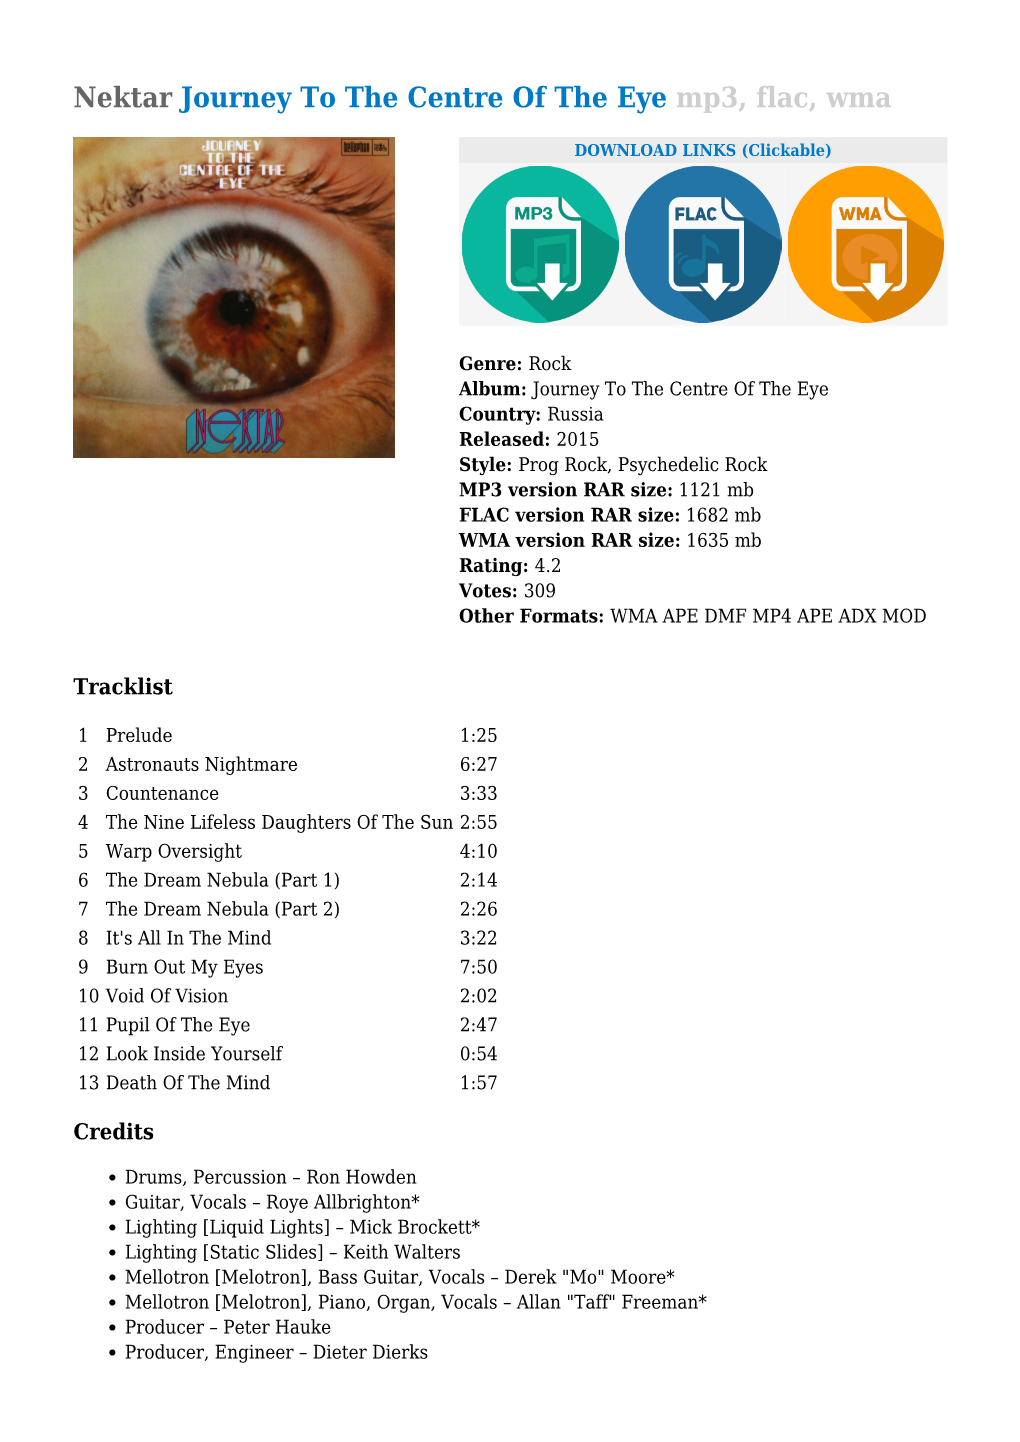 Nektar Journey to the Centre of the Eye Mp3, Flac, Wma